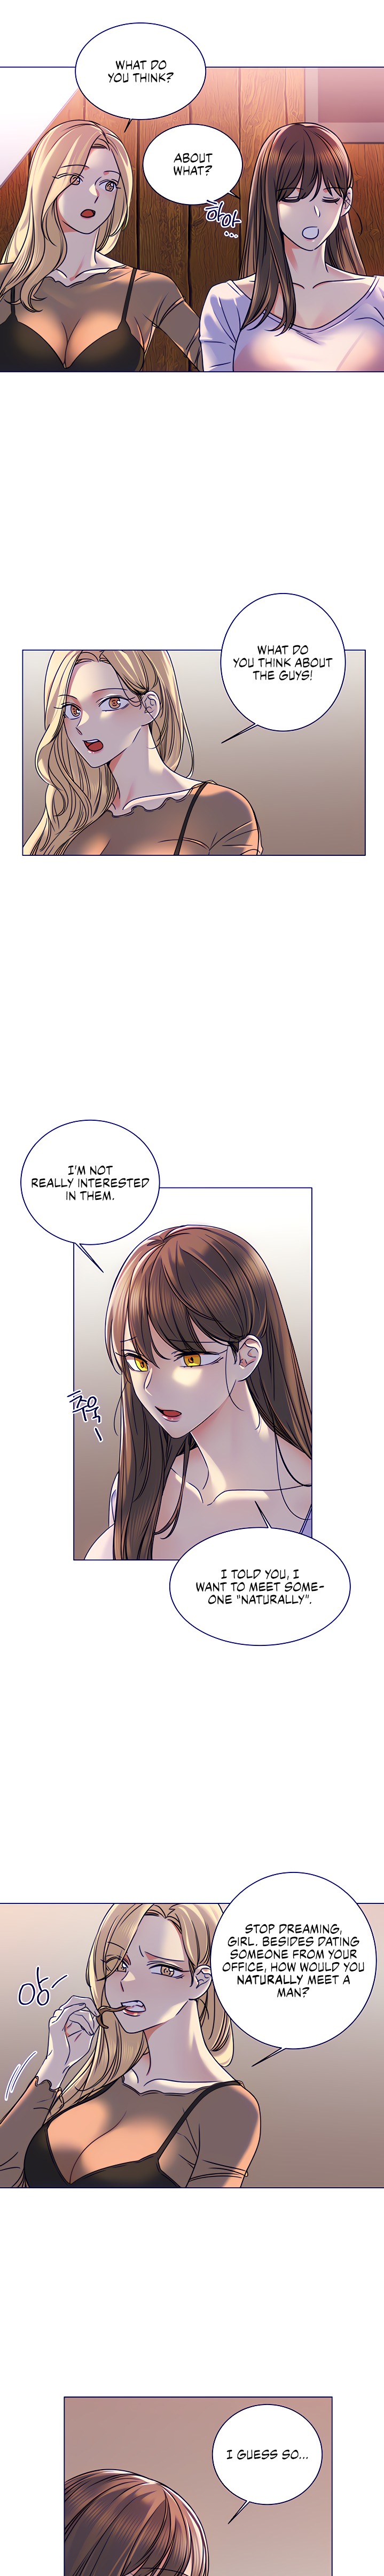 My girlfriend is so naughty - Chapter 4 Page 9